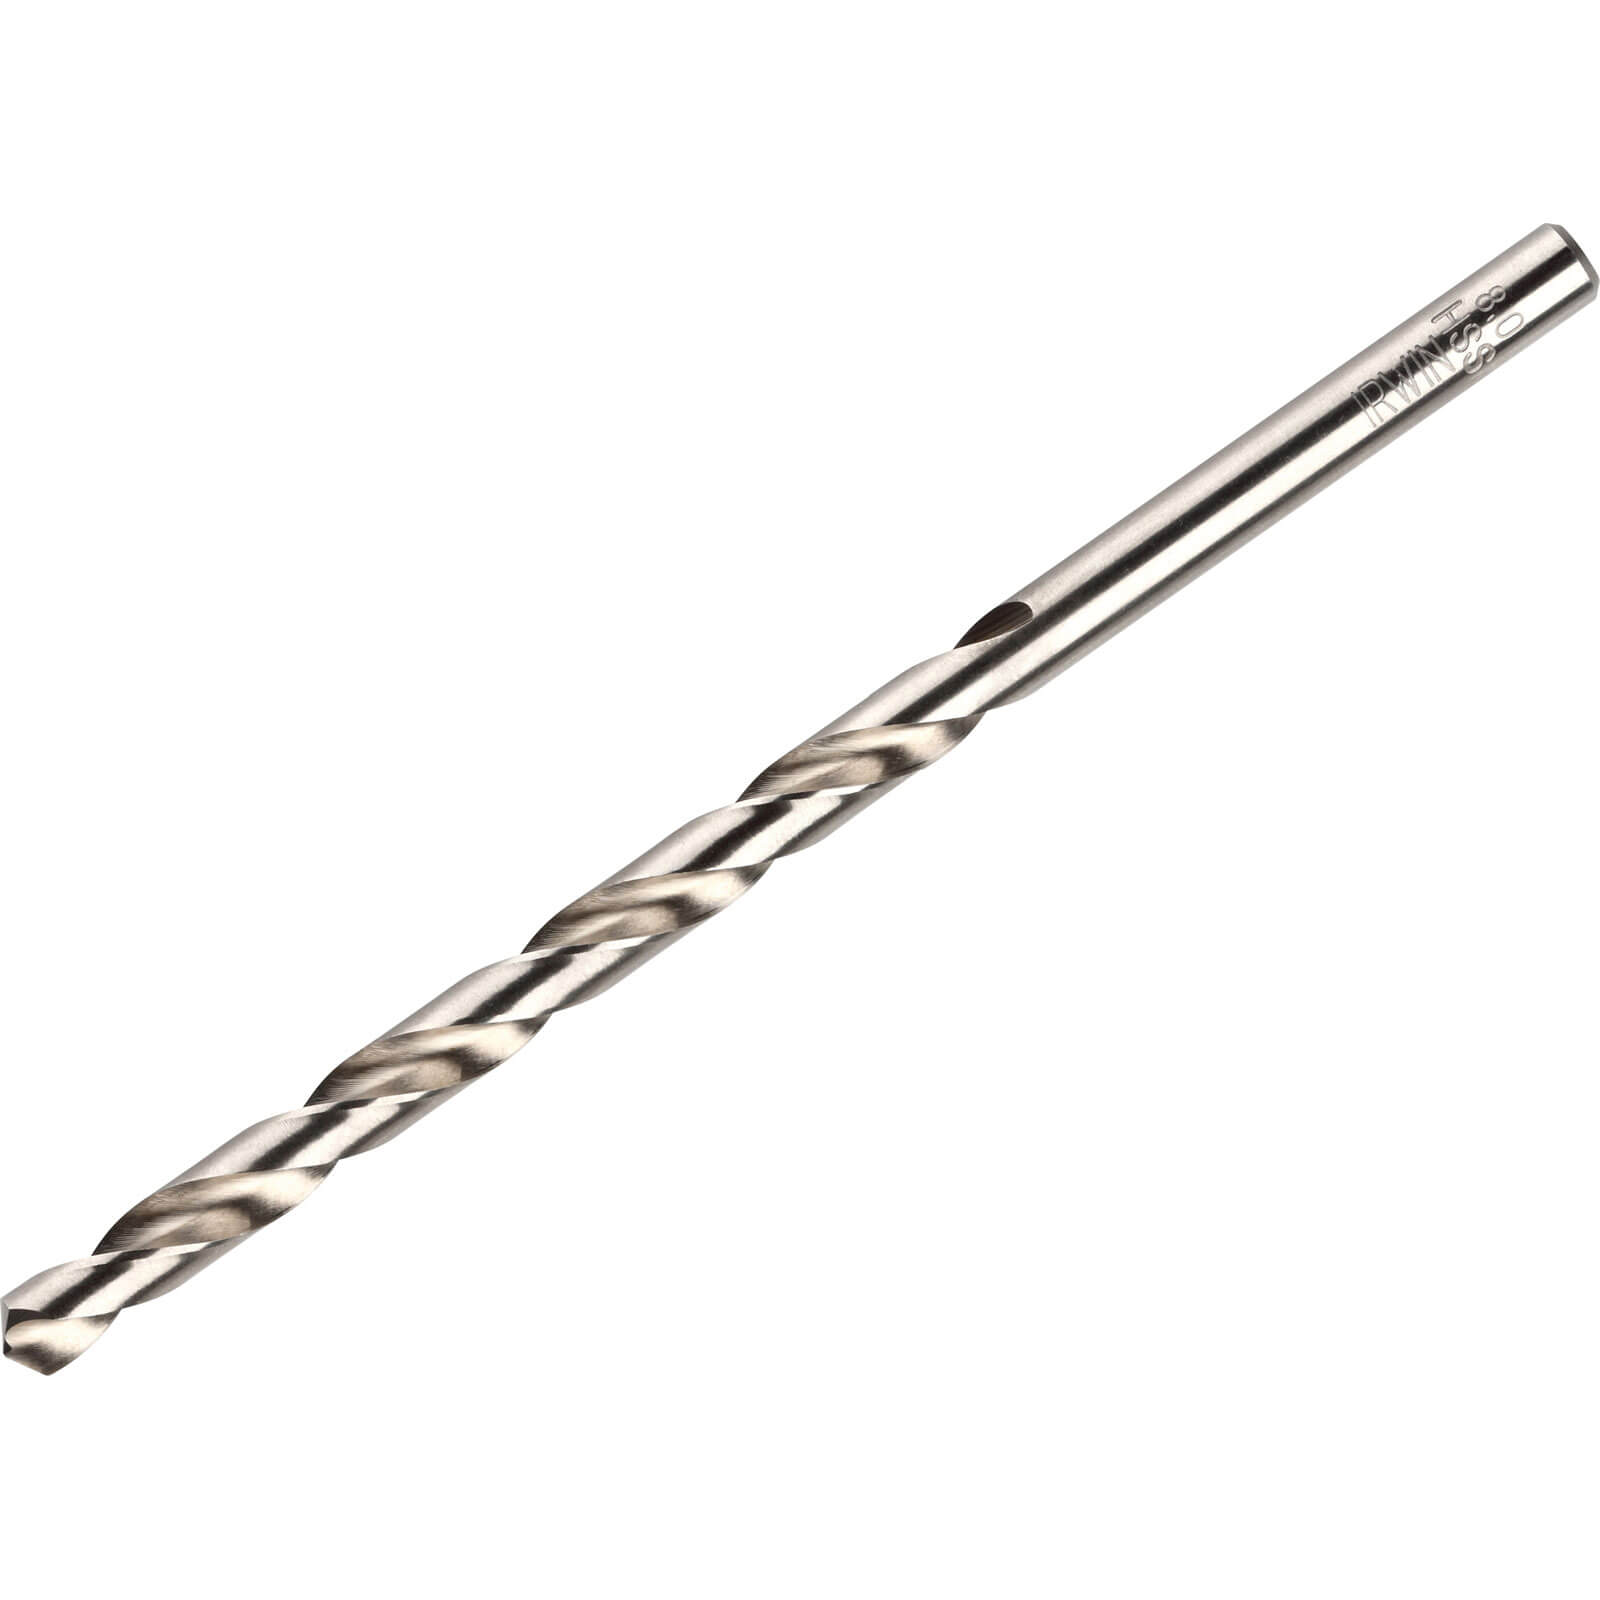 Photo of Irwin Hss Pro Drill Bits 10mm Pack Of 5